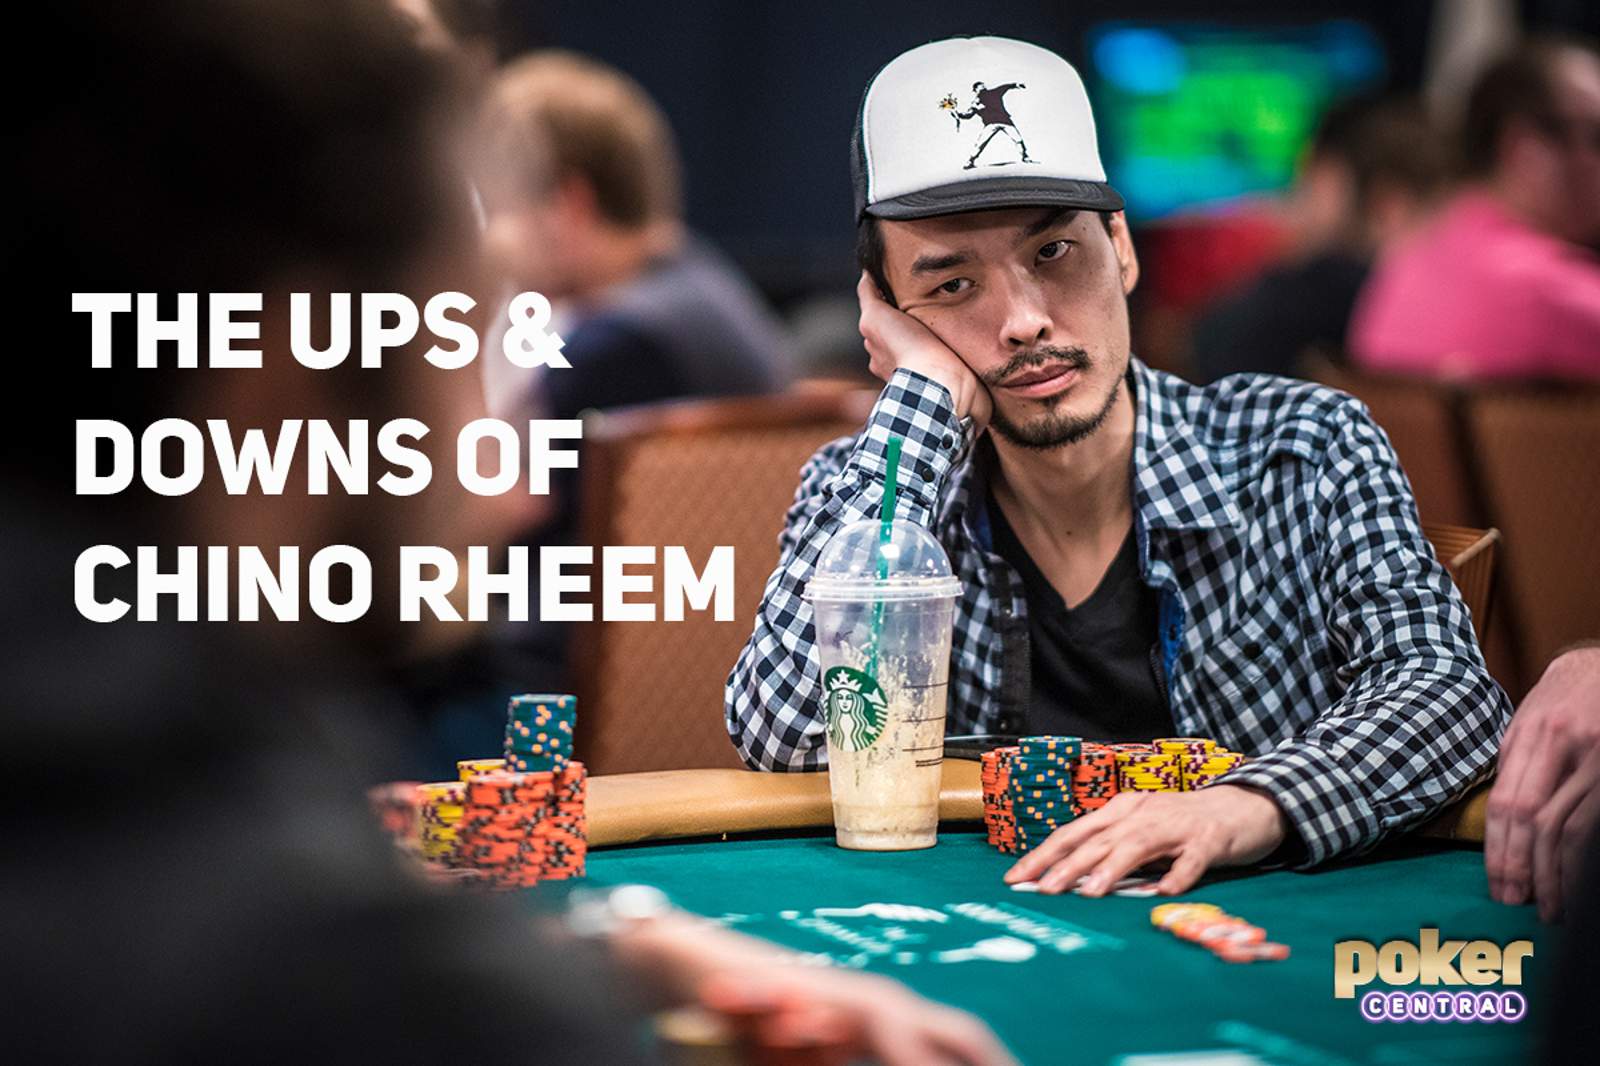 The Ups and Downs of Chino Rheem